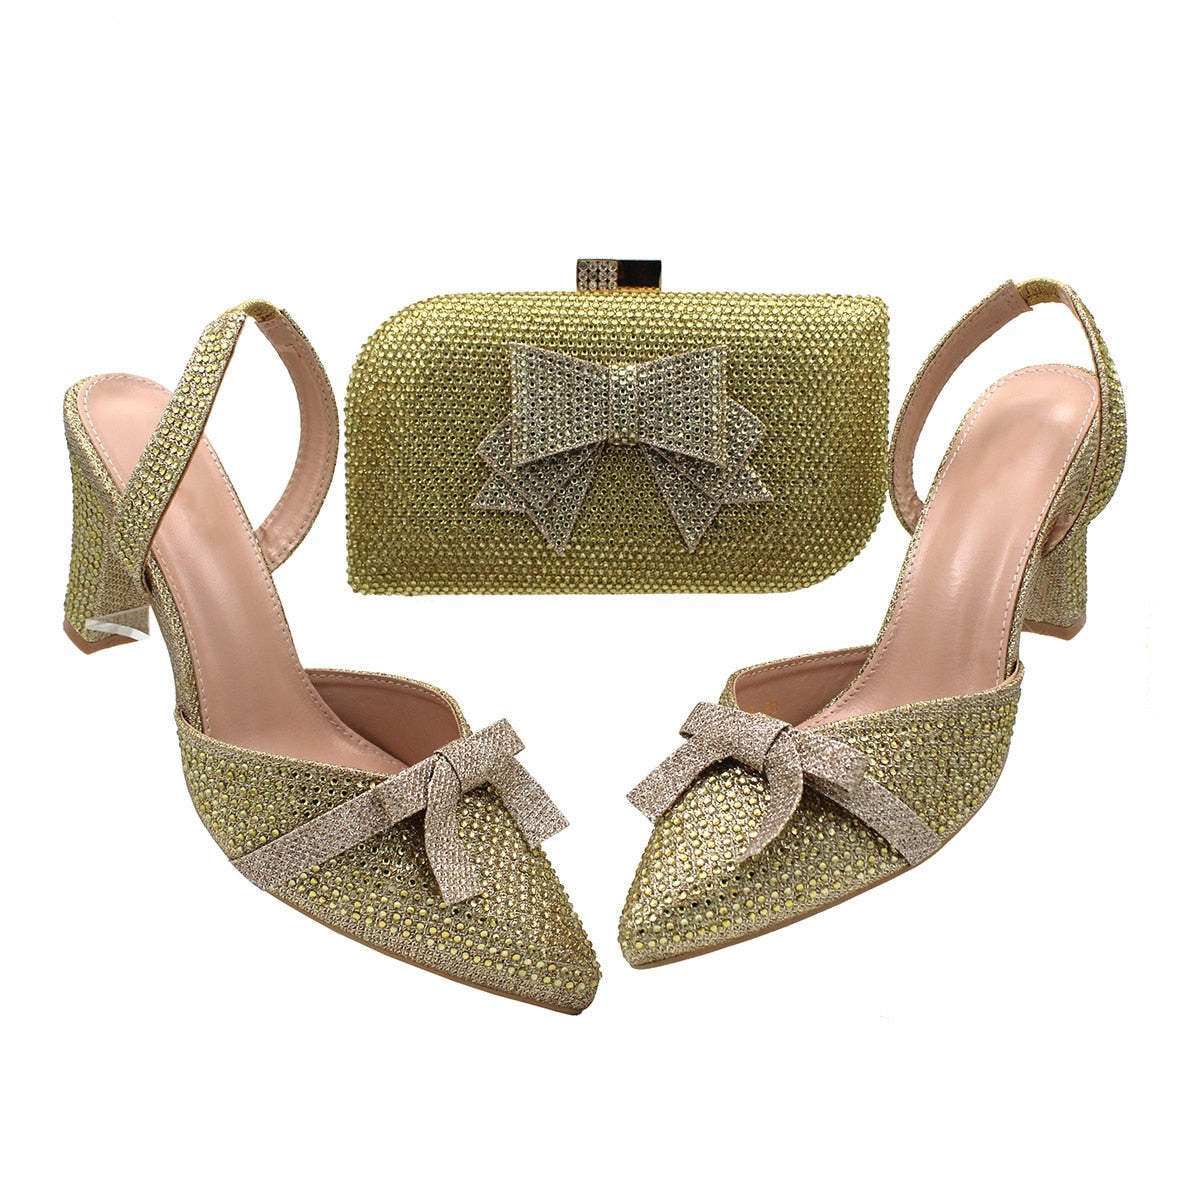 Italian Women Shoes and Bag to Matching Bag Set in Golden